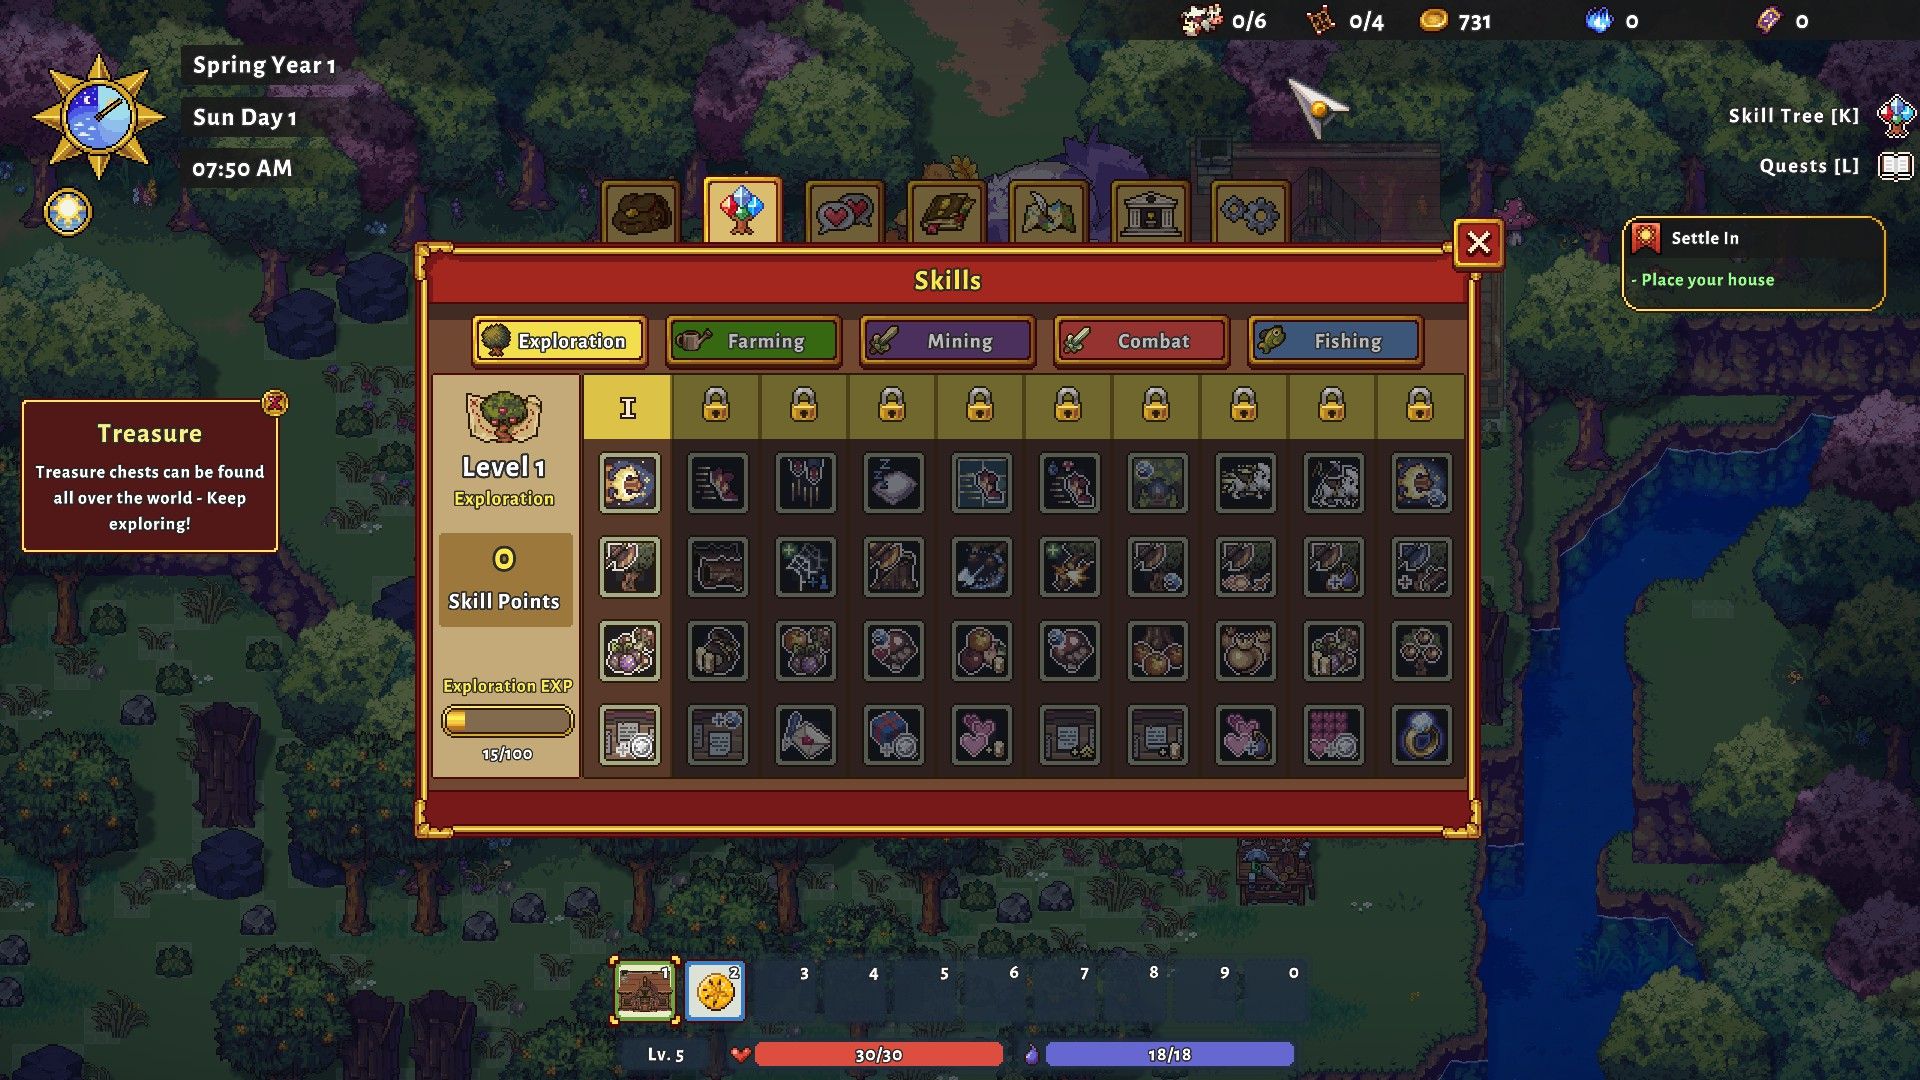 All the skills available through the Exploration Skill Tree in Sun Haven.